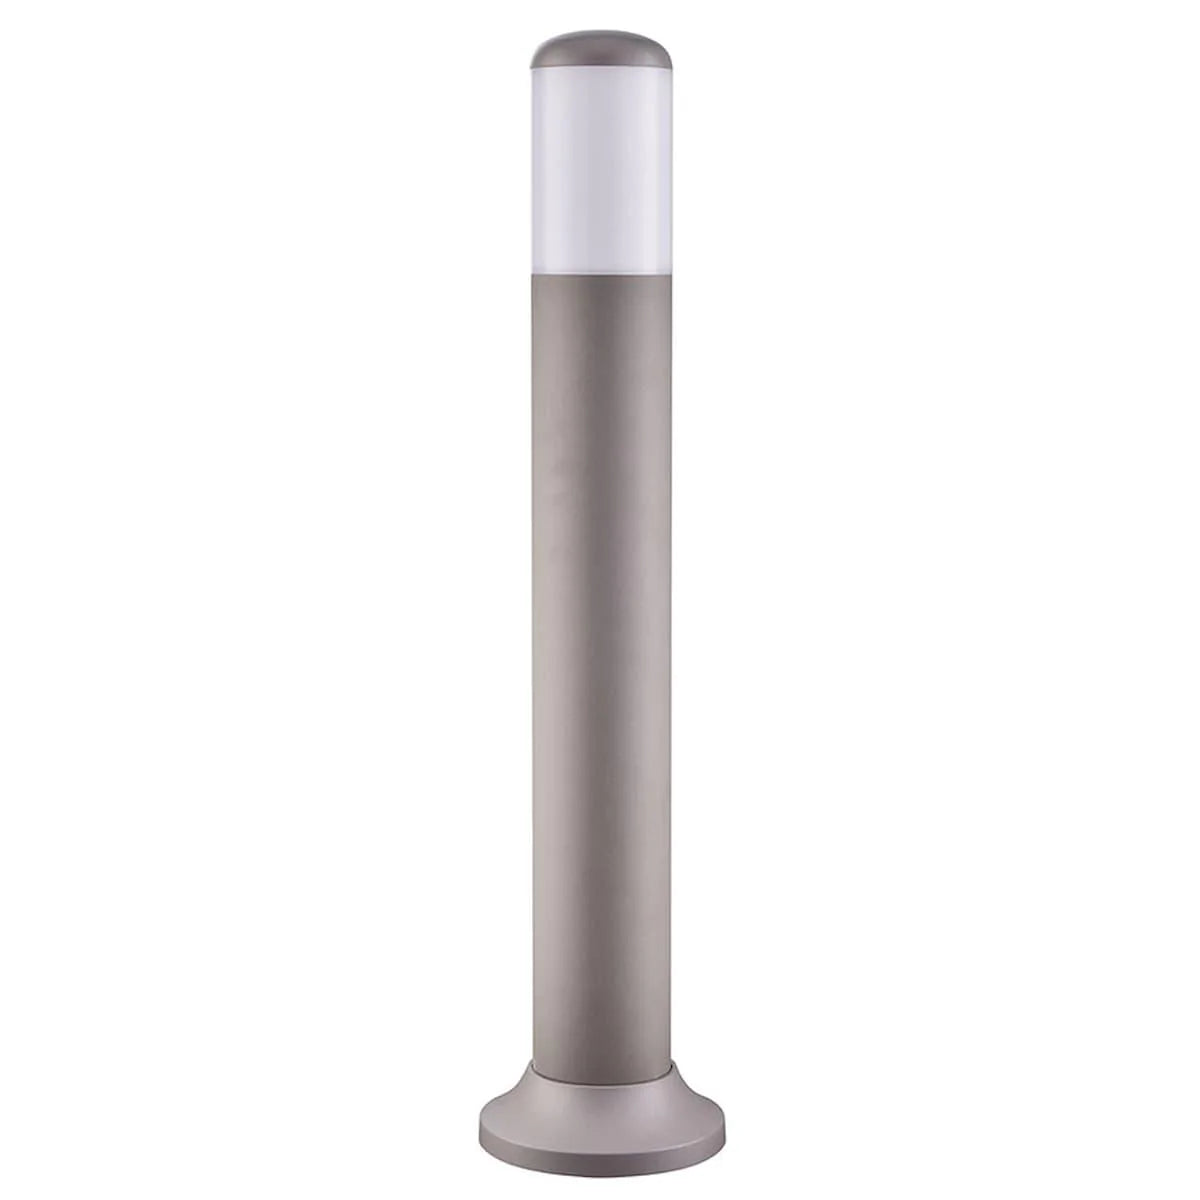 POLYCARBONATE CORROSION PROOF OUTDOOR LIGHT – GREY FINISH |EL7001/70GRY - Peter Murphy Lighting & Electrical Ltd